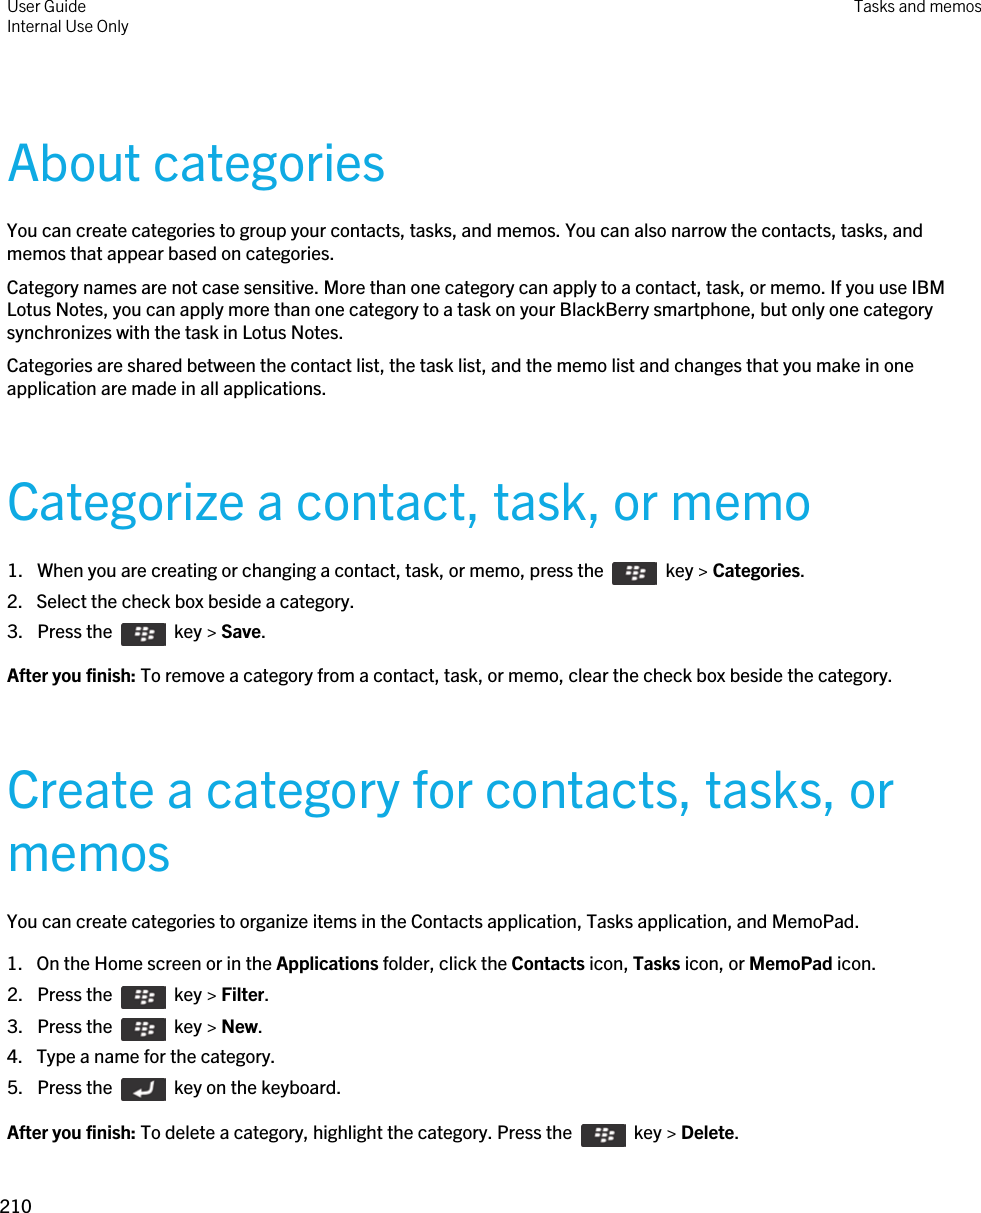 About categoriesYou can create categories to group your contacts, tasks, and memos. You can also narrow the contacts, tasks, and memos that appear based on categories.Category names are not case sensitive. More than one category can apply to a contact, task, or memo. If you use IBM Lotus Notes, you can apply more than one category to a task on your BlackBerry smartphone, but only one category synchronizes with the task in Lotus Notes.Categories are shared between the contact list, the task list, and the memo list and changes that you make in one application are made in all applications.Categorize a contact, task, or memo1.  When you are creating or changing a contact, task, or memo, press the    key &gt; Categories. 2. Select the check box beside a category.3.  Press the    key &gt; Save. After you finish: To remove a category from a contact, task, or memo, clear the check box beside the category.Create a category for contacts, tasks, or memosYou can create categories to organize items in the Contacts application, Tasks application, and MemoPad.1. On the Home screen or in the Applications folder, click the Contacts icon, Tasks icon, or MemoPad icon.2.  Press the    key &gt; Filter. 3.  Press the    key &gt; New. 4. Type a name for the category.5.  Press the    key on the keyboard. After you finish: To delete a category, highlight the category. Press the    key &gt; Delete.User GuideInternal Use Only Tasks and memos210 